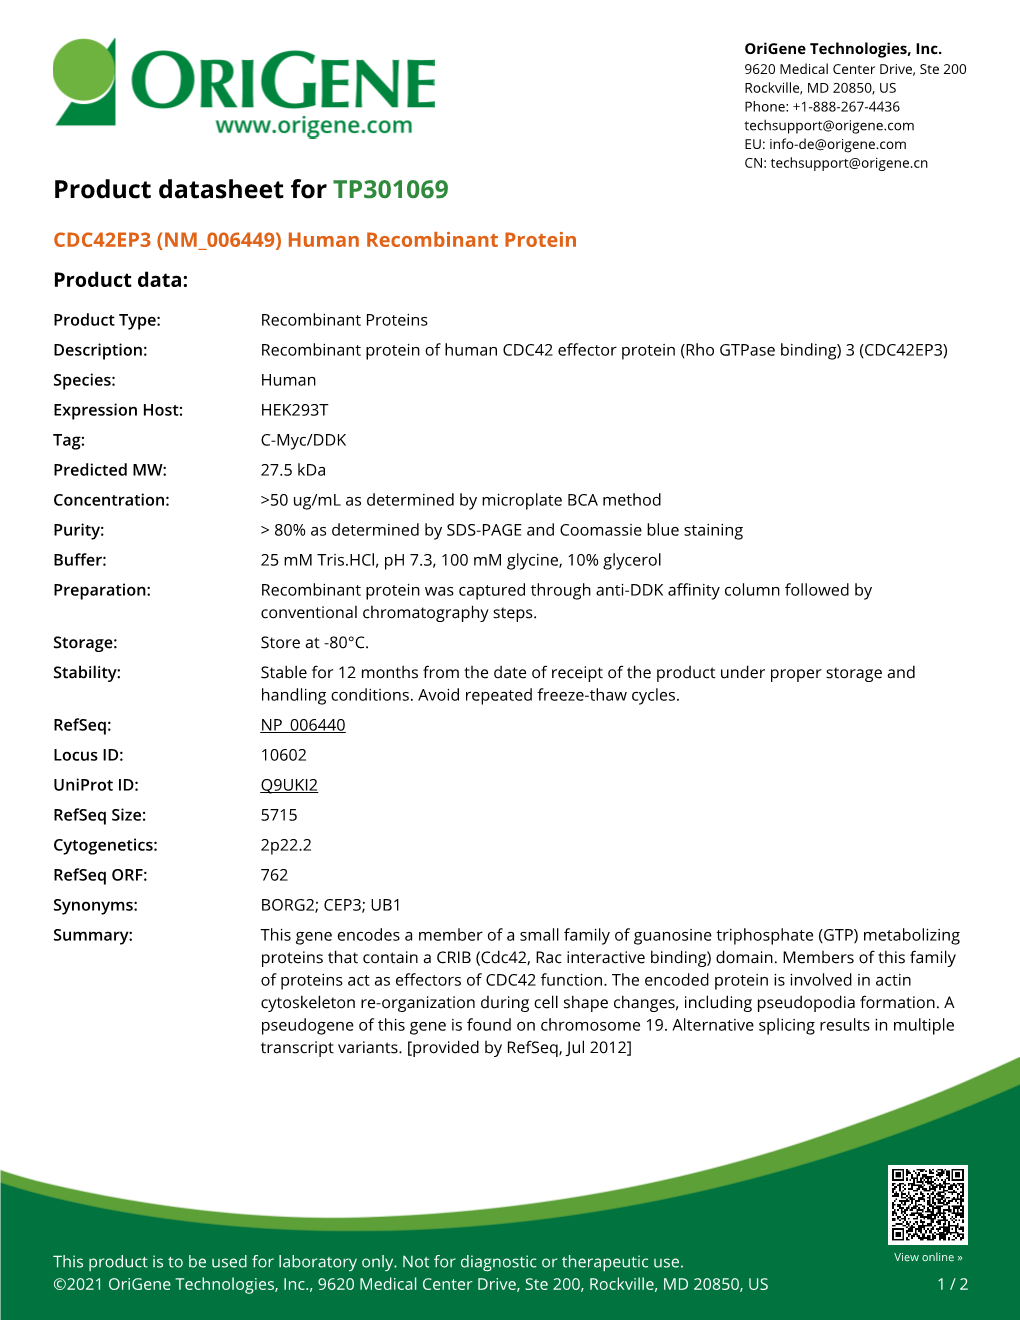 CDC42EP3 (NM 006449) Human Recombinant Protein Product Data